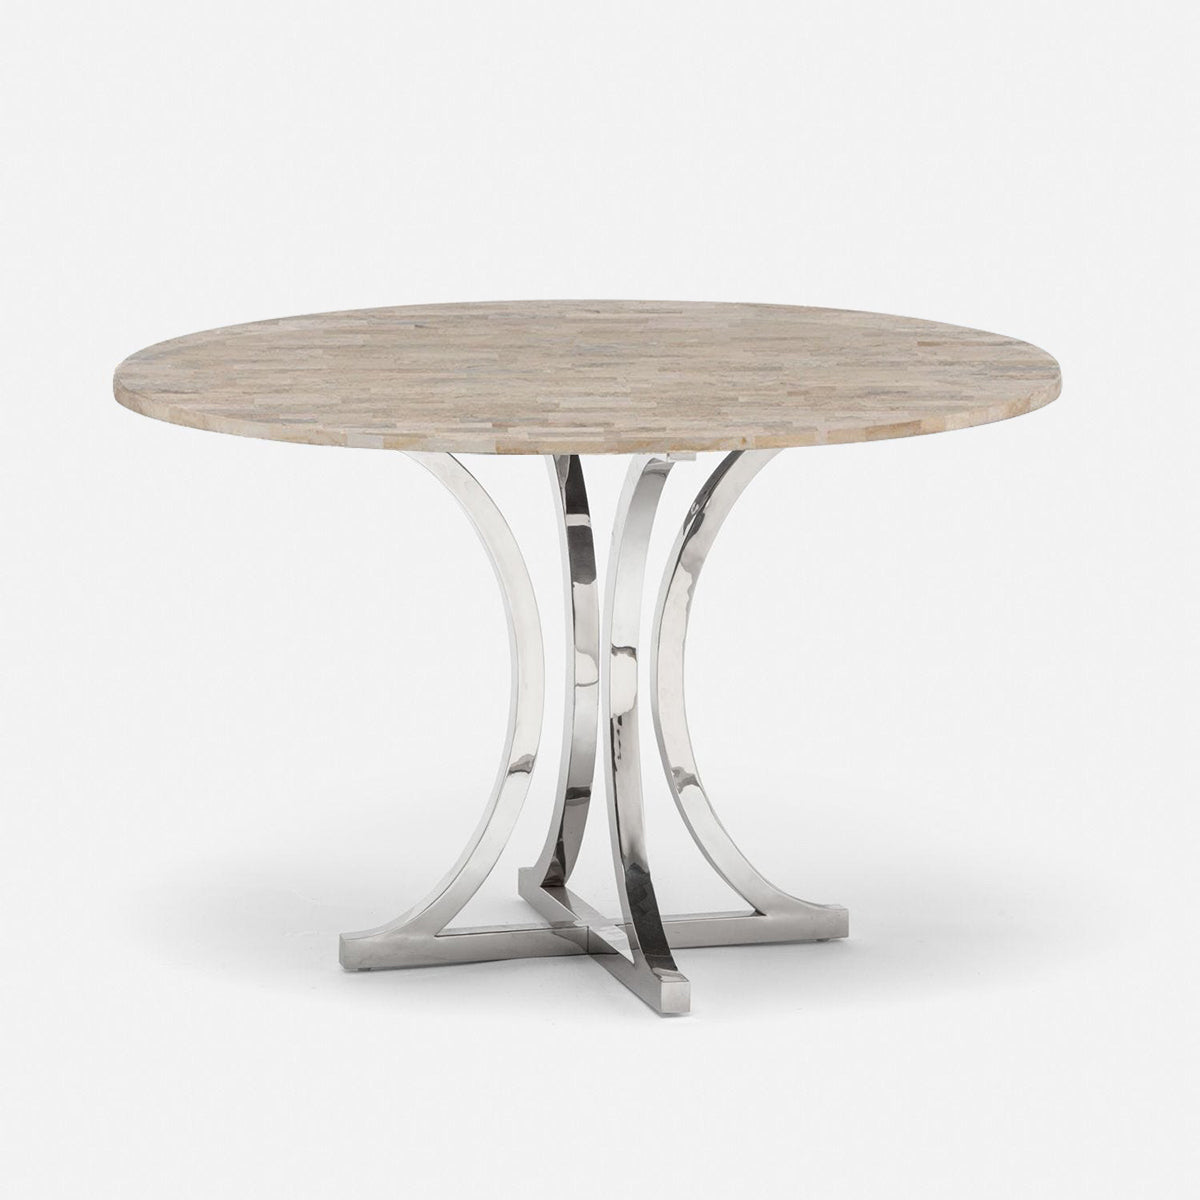 Made Goods Leighton Round Dining Table in Warm Gray Marble